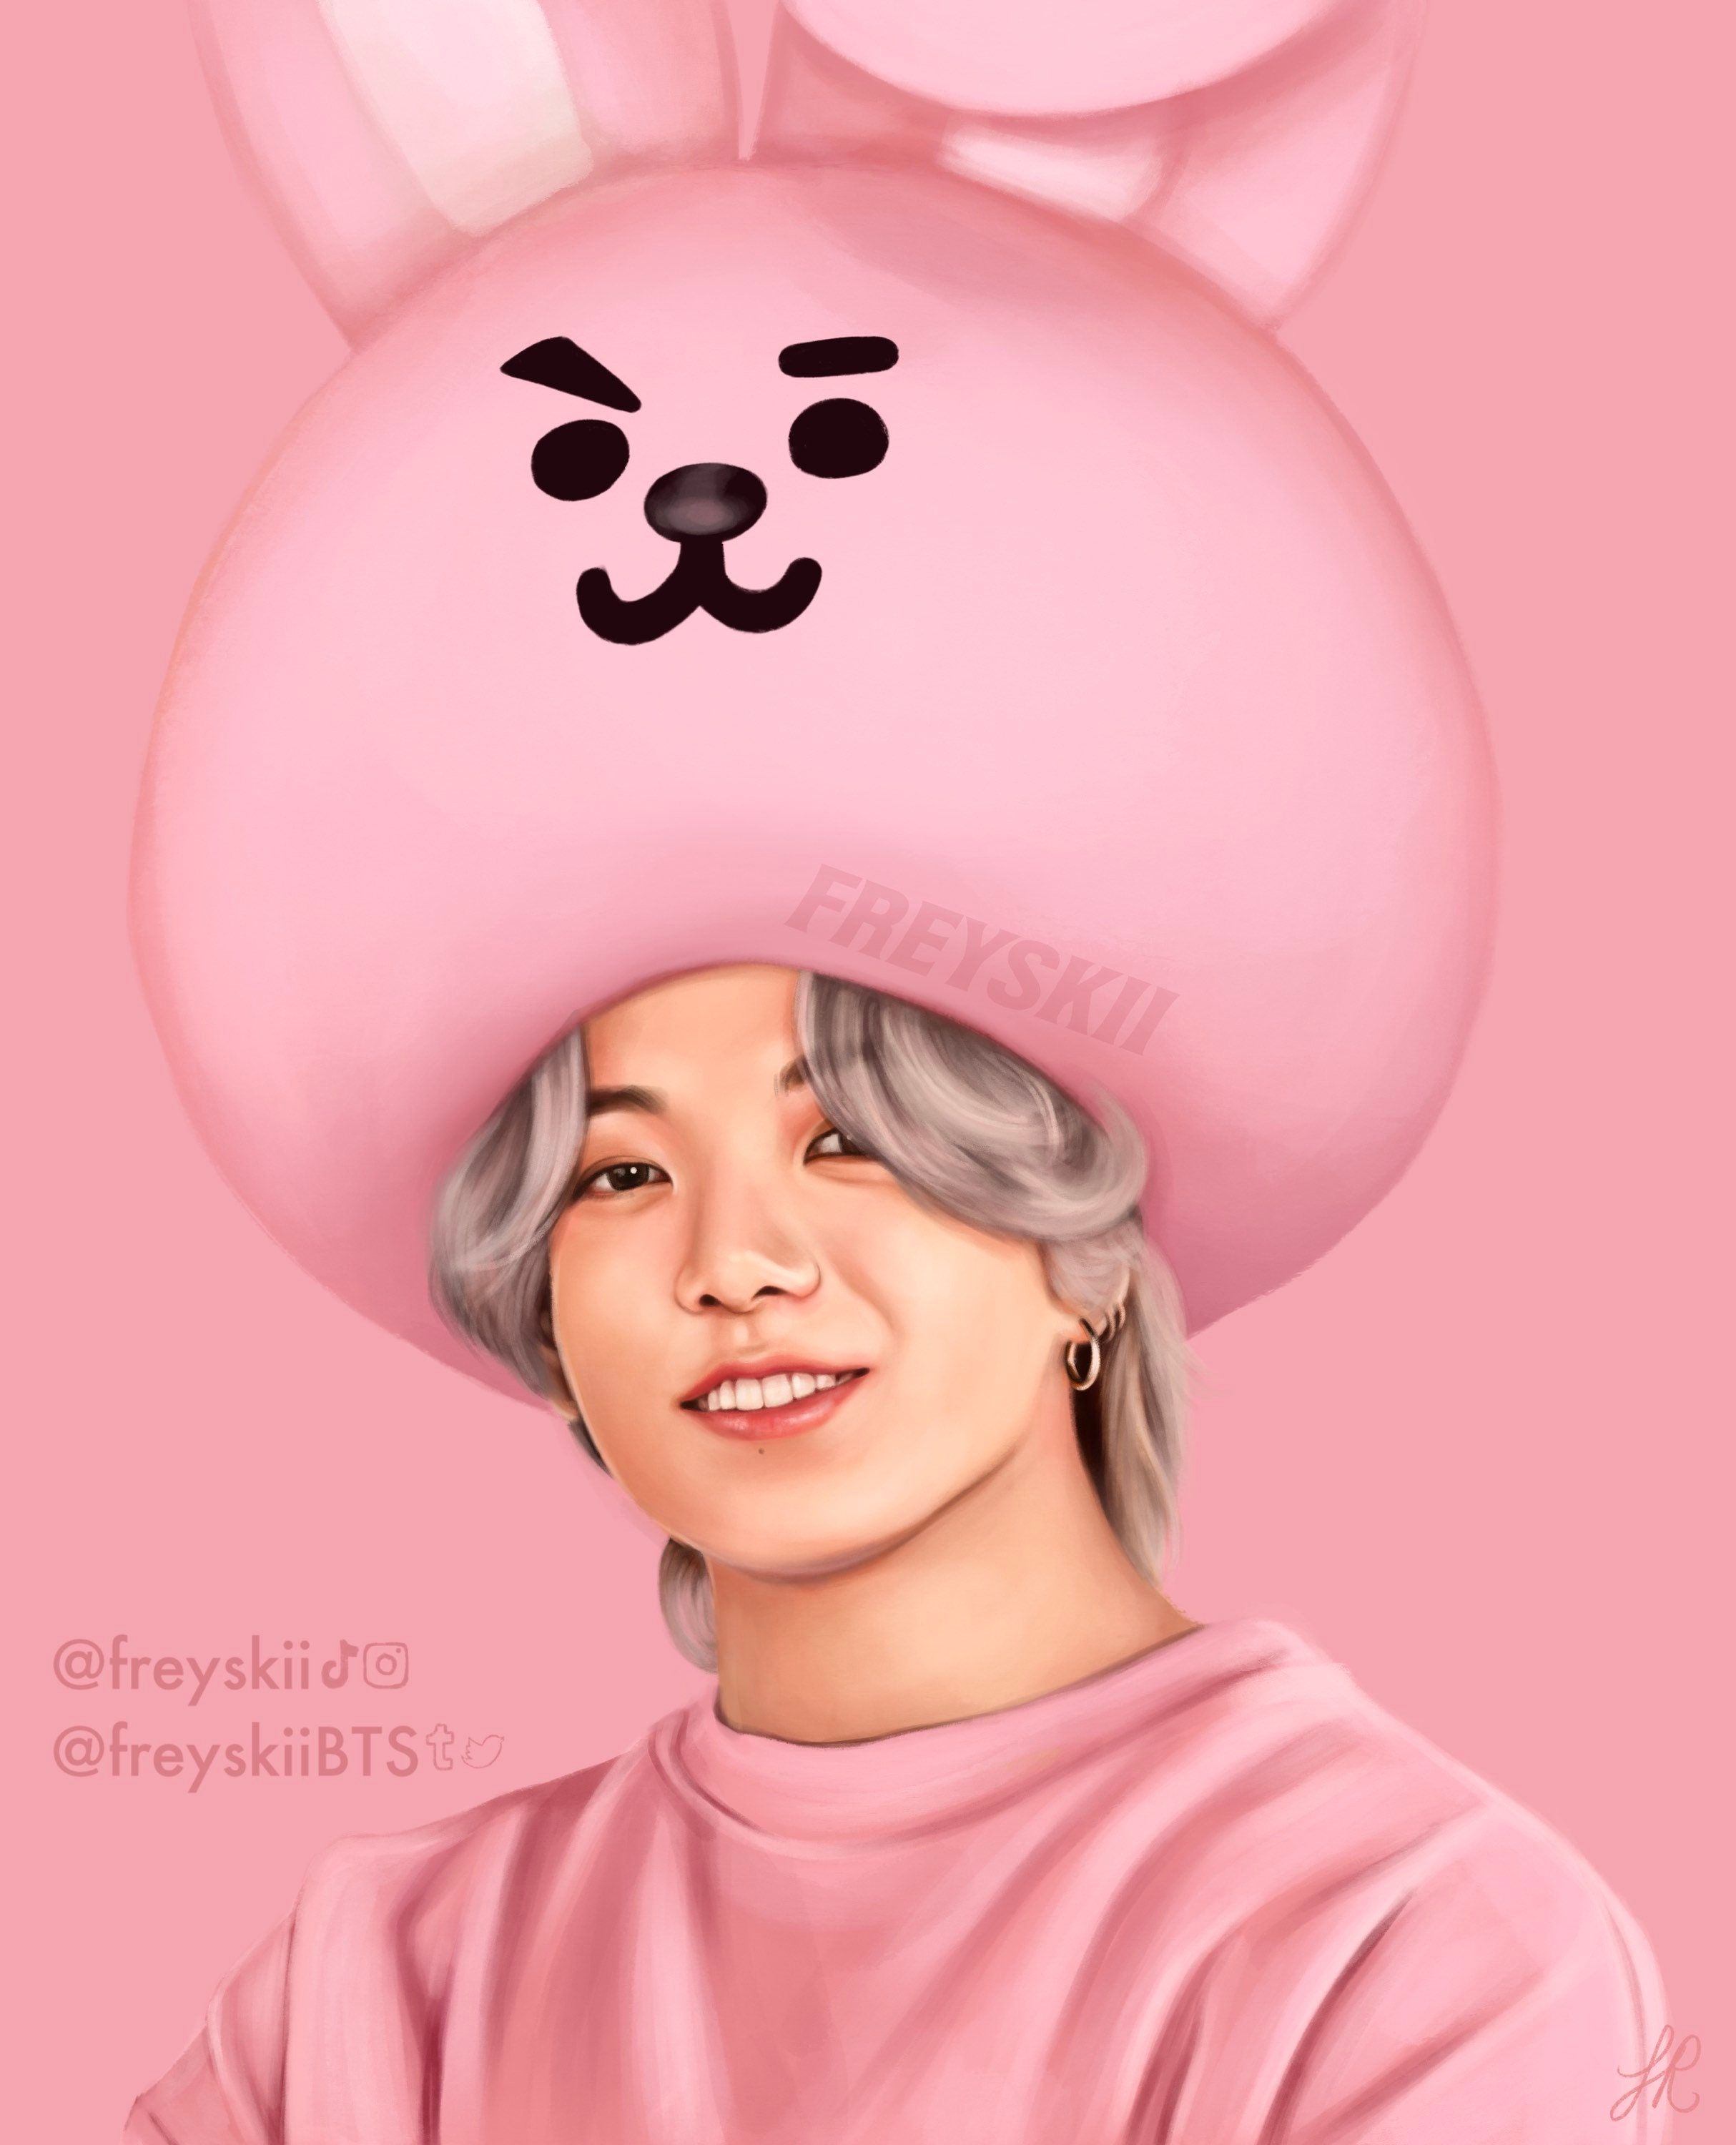 A painting of an asian girl with pink hair and bunny ears - BT21